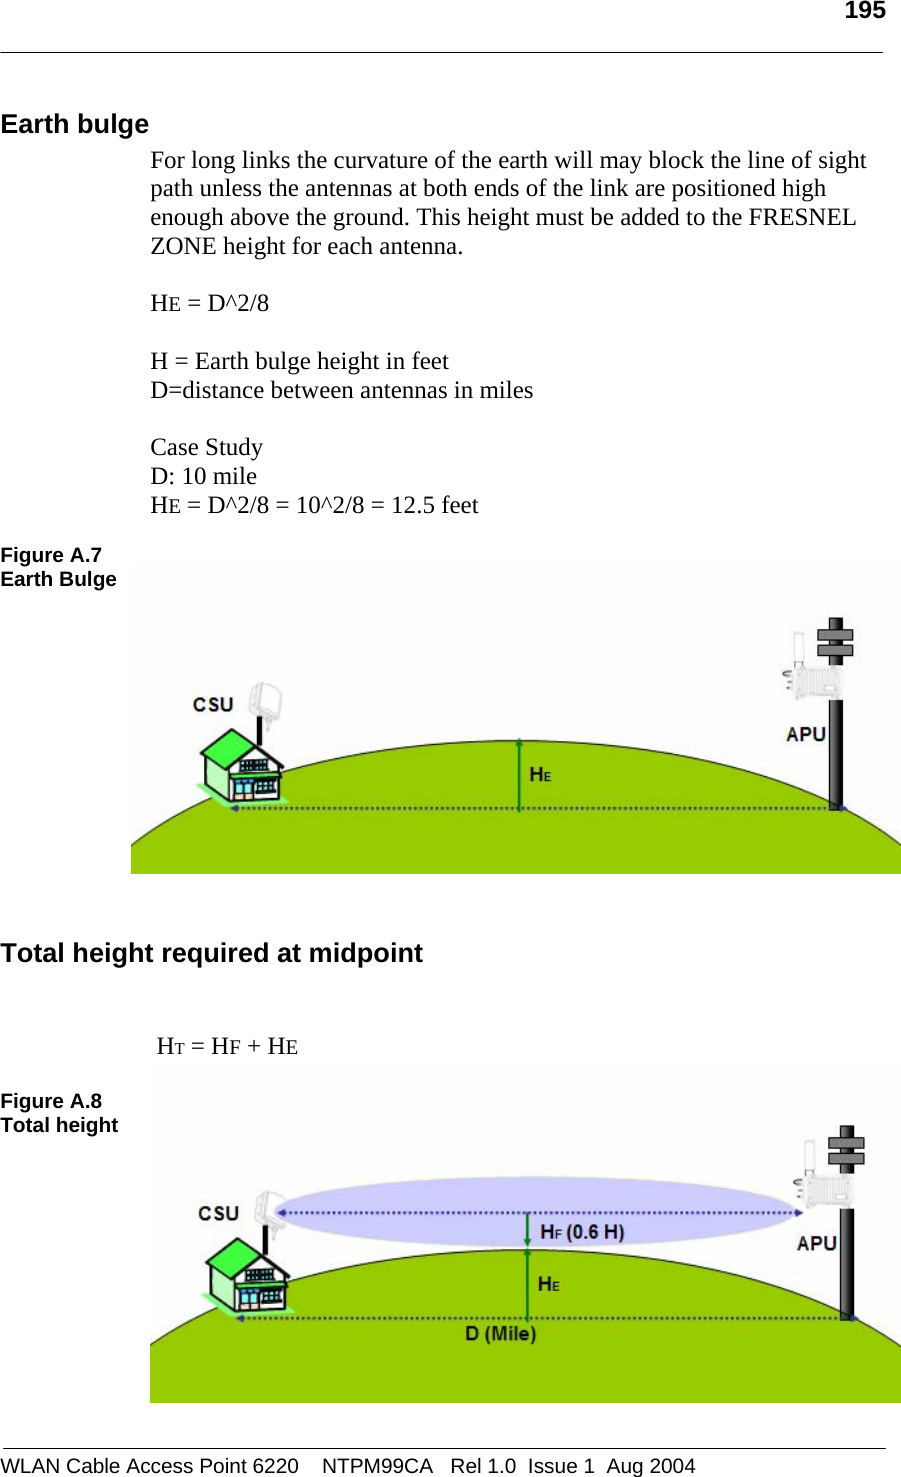   195  Earth bulge For long links the curvature of the earth will may block the line of sight path unless the antennas at both ends of the link are positioned high enough above the ground. This height must be added to the FRESNEL ZONE height for each antenna.  HE = D^2/8  H = Earth bulge height in feet D=distance between antennas in miles  Case Study D: 10 mile HE = D^2/8 = 10^2/8 = 12.5 feet  Figure A.7 Earth Bulge           Total height required at midpoint         HT = HF + HE   Figure A.8 Total height      WLAN Cable Access Point 6220    NTPM99CA   Rel 1.0  Issue 1  Aug 2004 